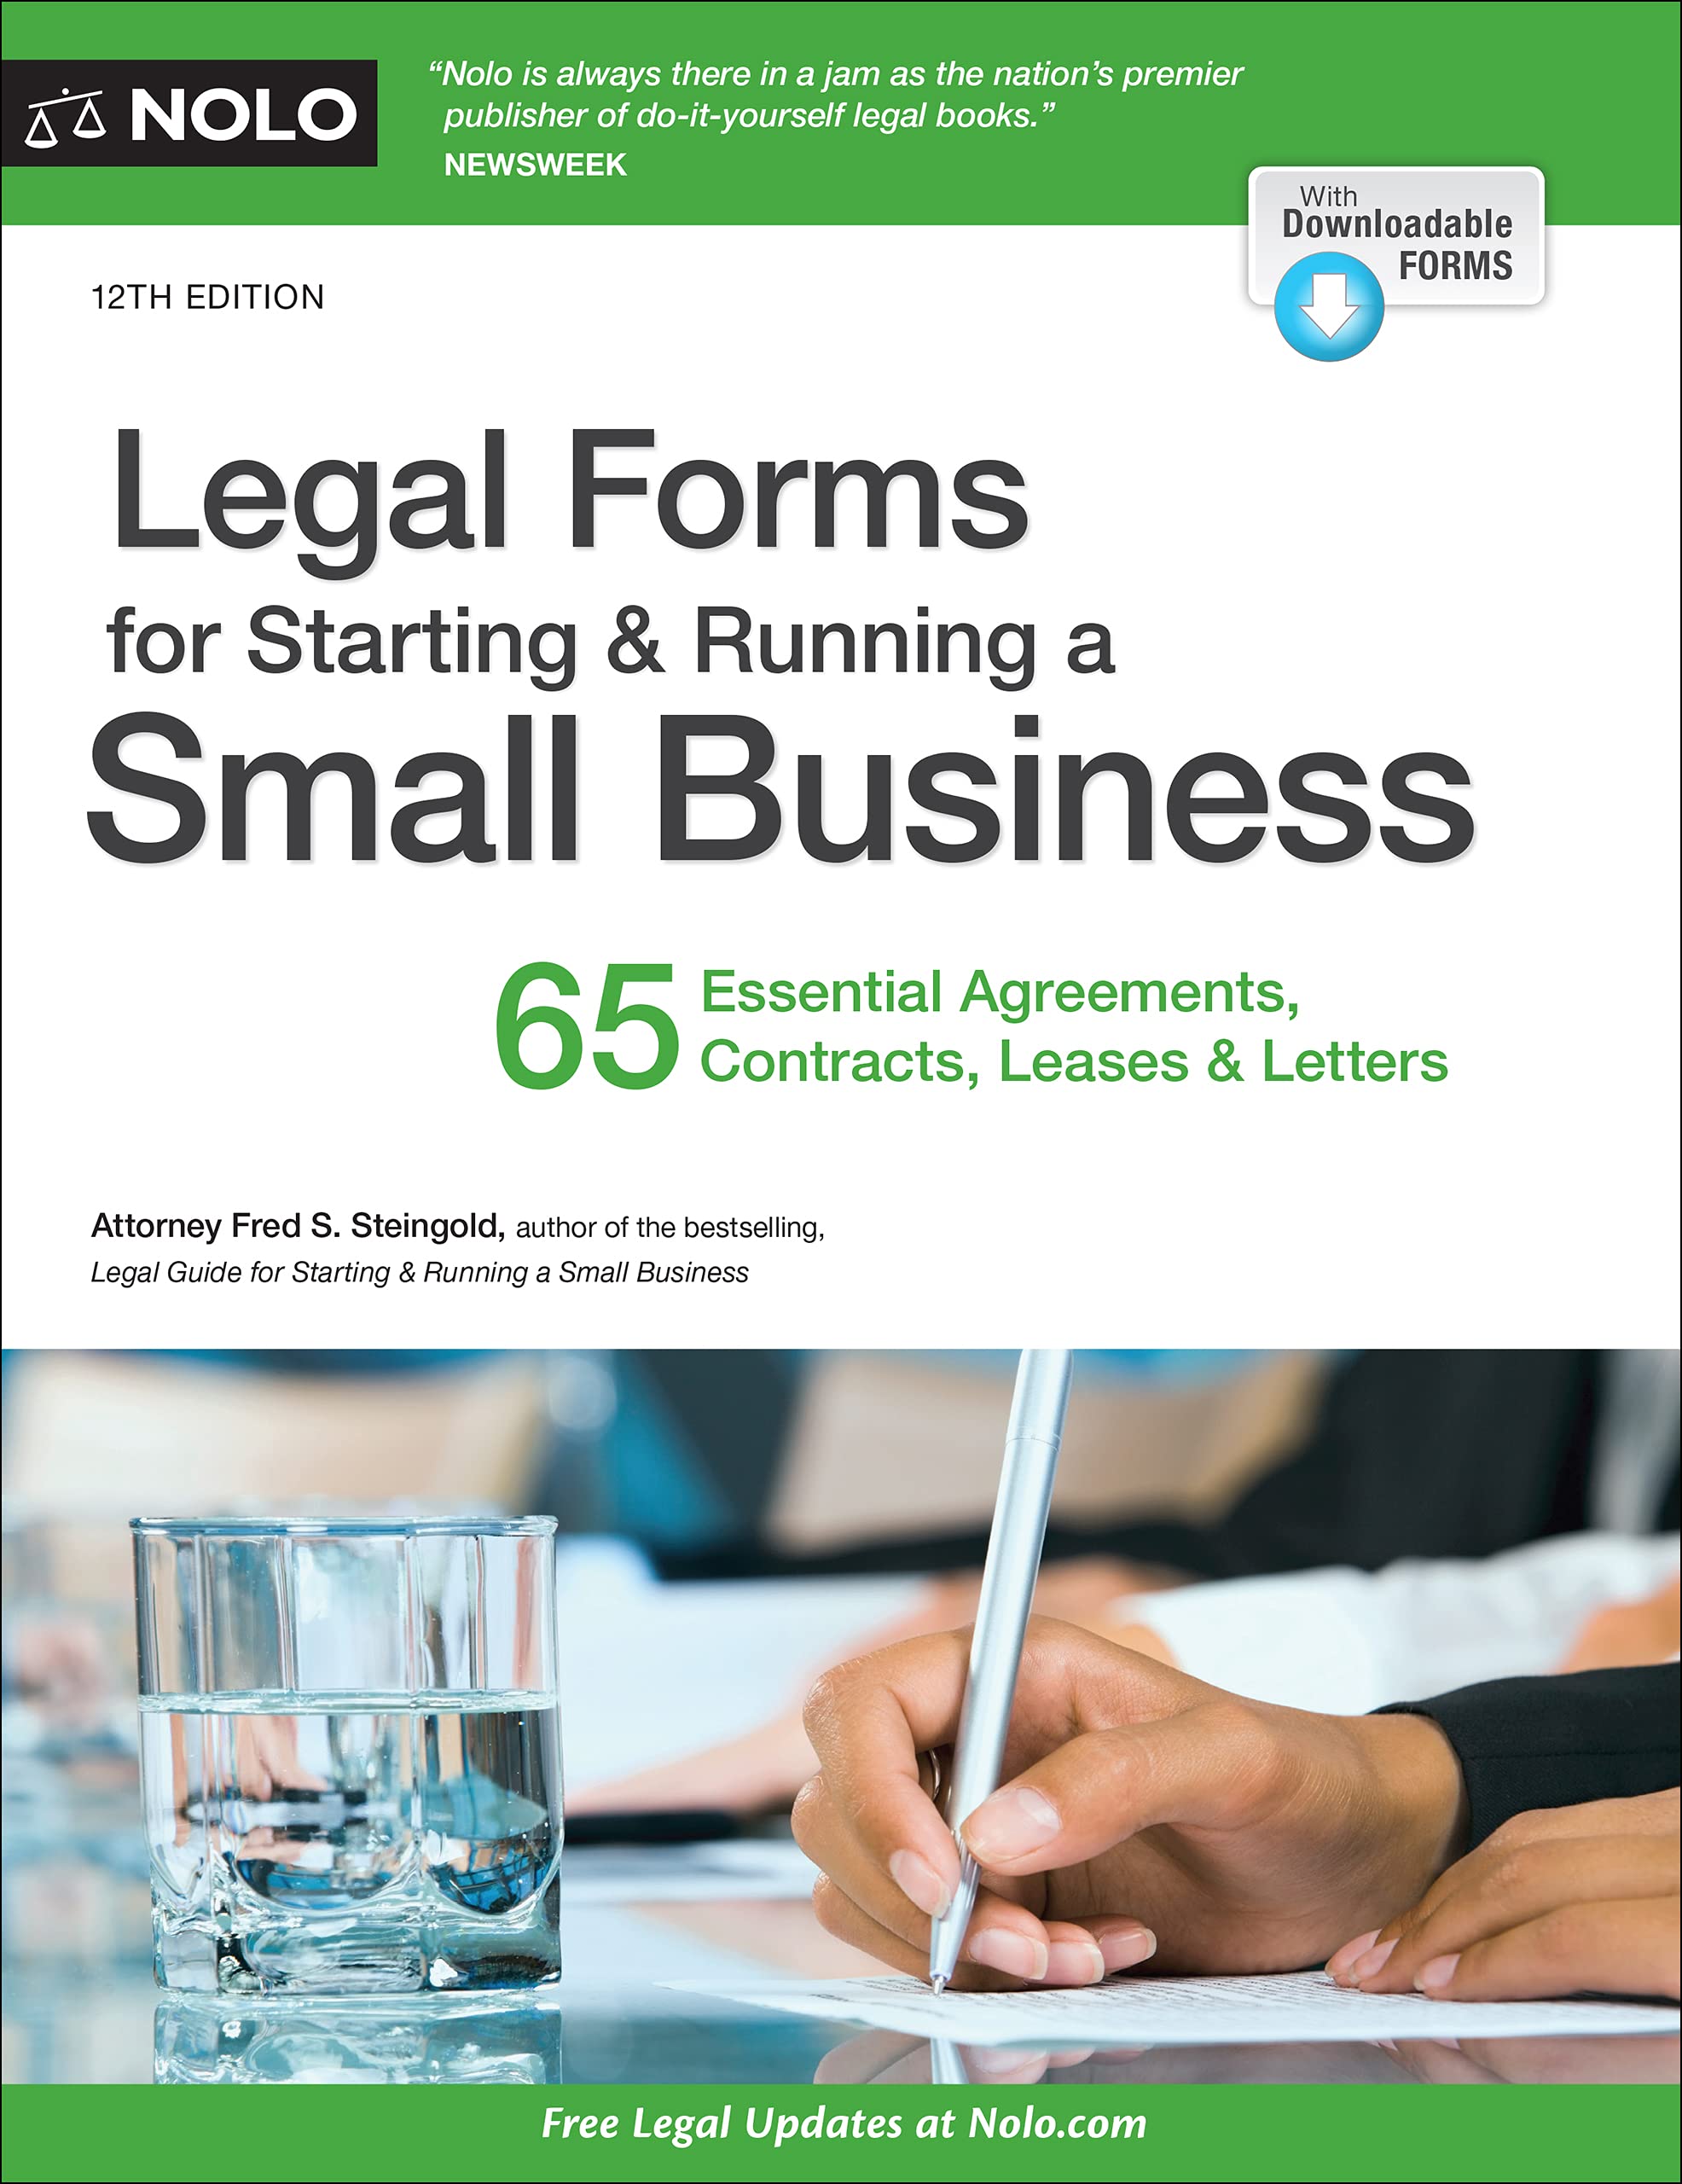 Legal Forms for Starting & Running a Small Business: 65 Essential Agreements, Contracts, Leases & Letters - SureShot Books Publishing LLC